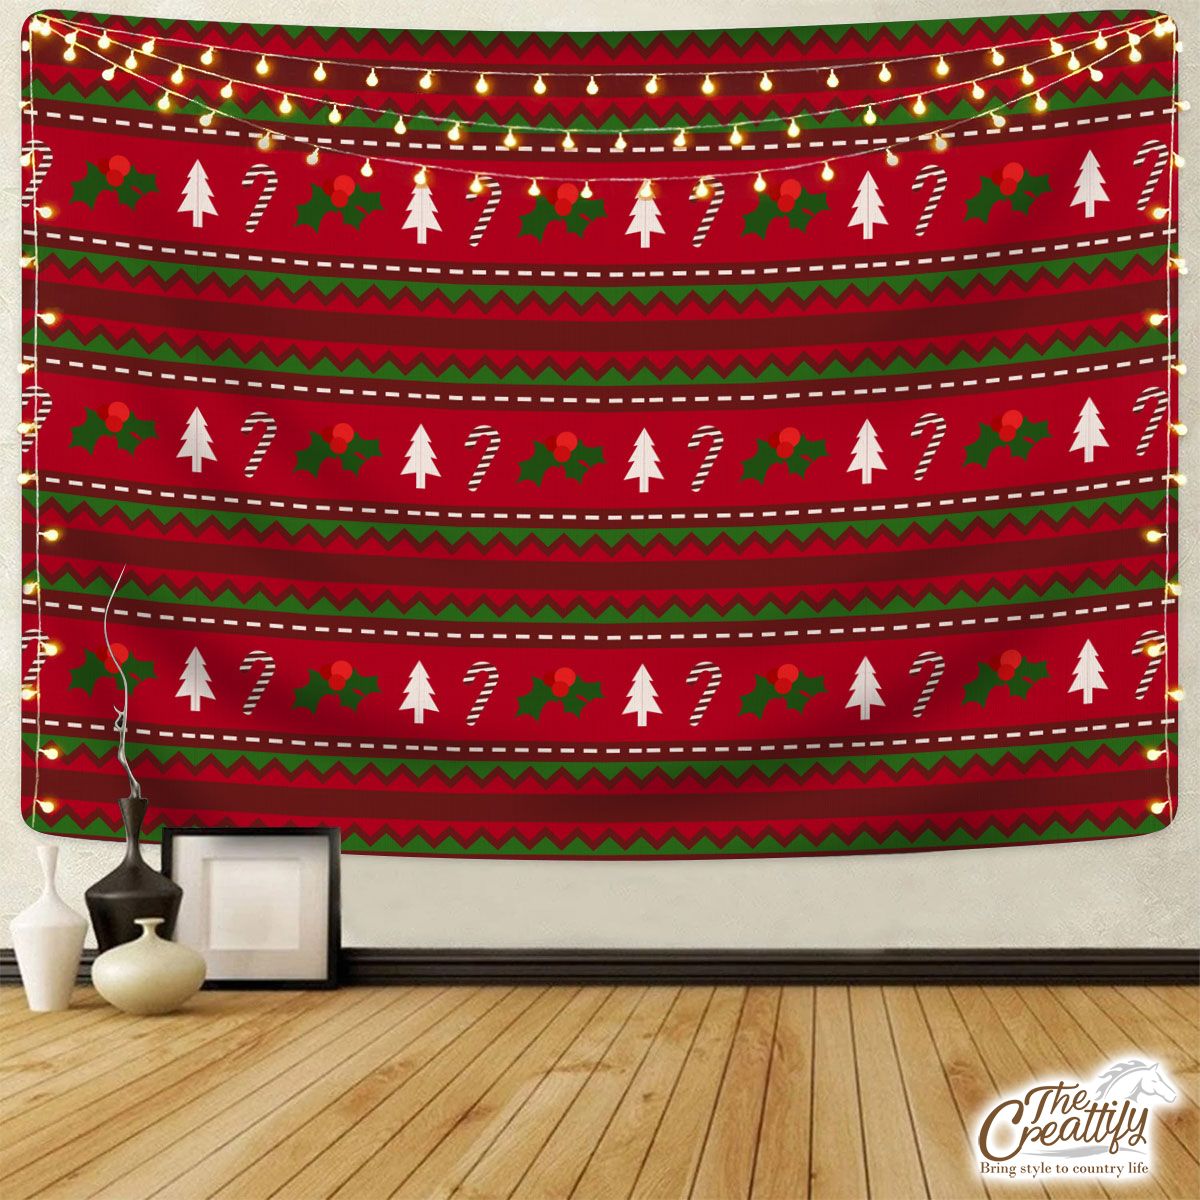 Red Green And White Christmas Tree, Holly Leaf With Candy Cane.jpg Tapestry